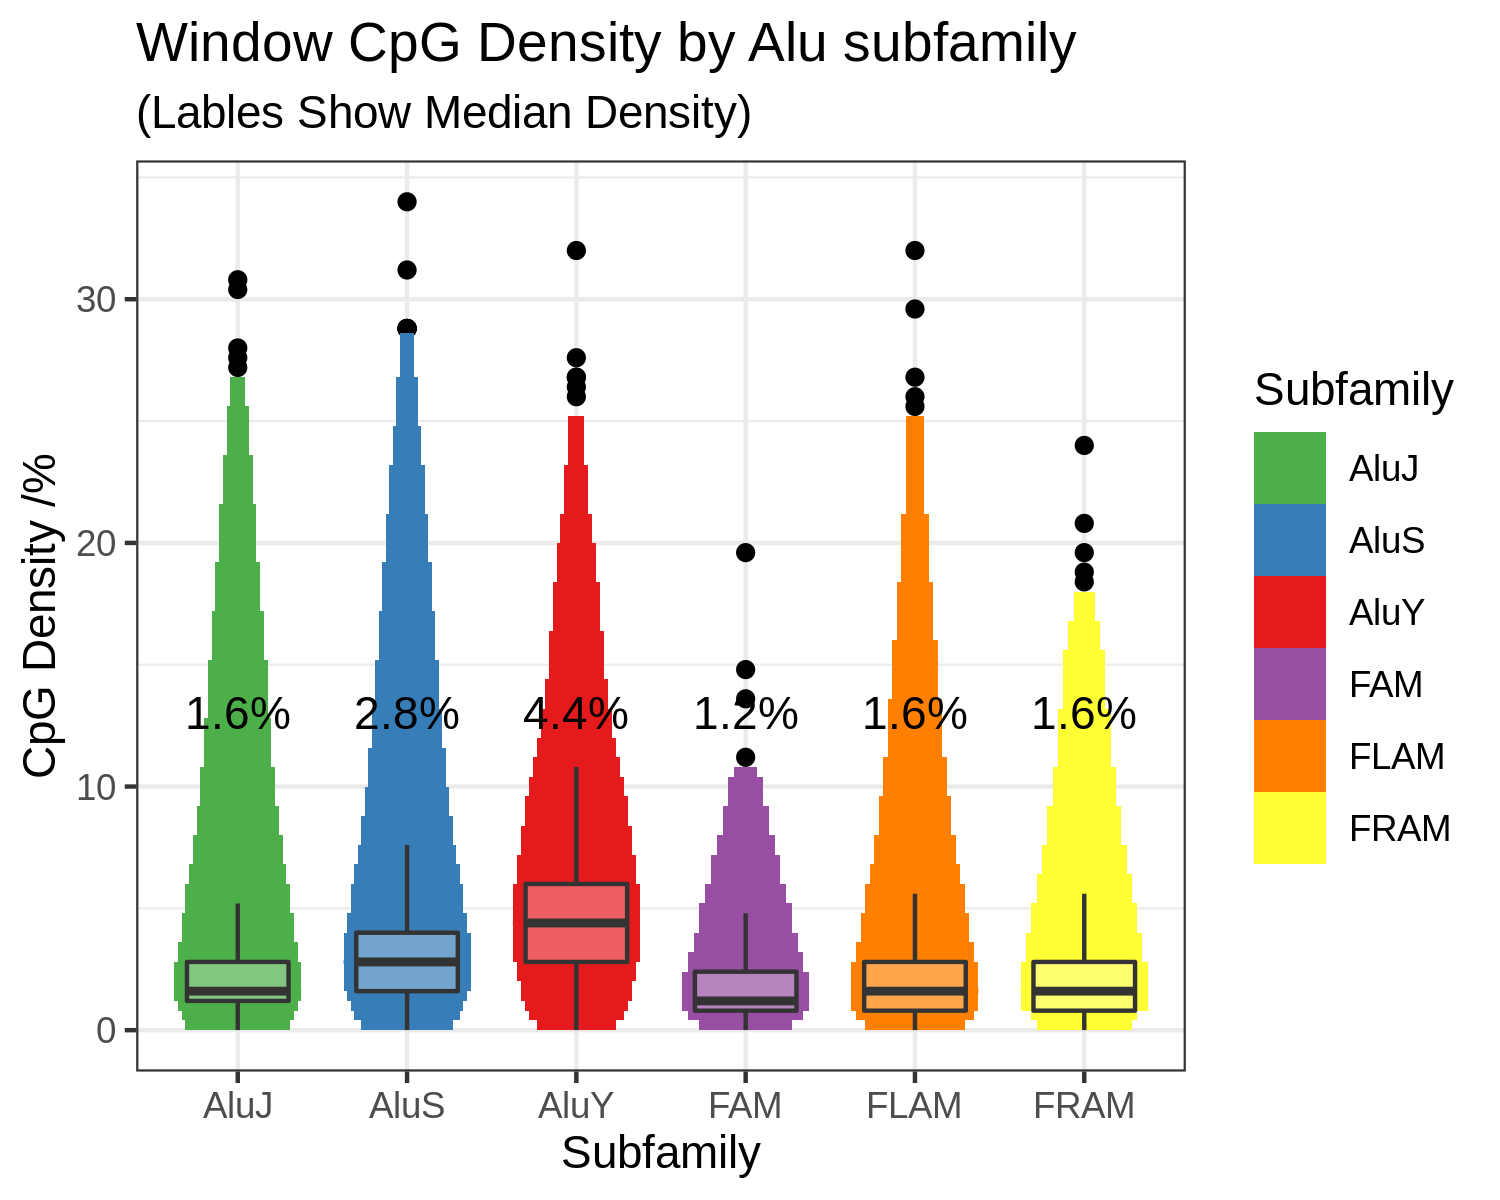 Alu elements are CpG dense FAM, FLAM and FRAM sequences are the precursors which gave rise to the modern Alu families, they are less CpG dense than the AluS and AluY families and closer to the global average of ~1.8% Chapter 1.4.2.